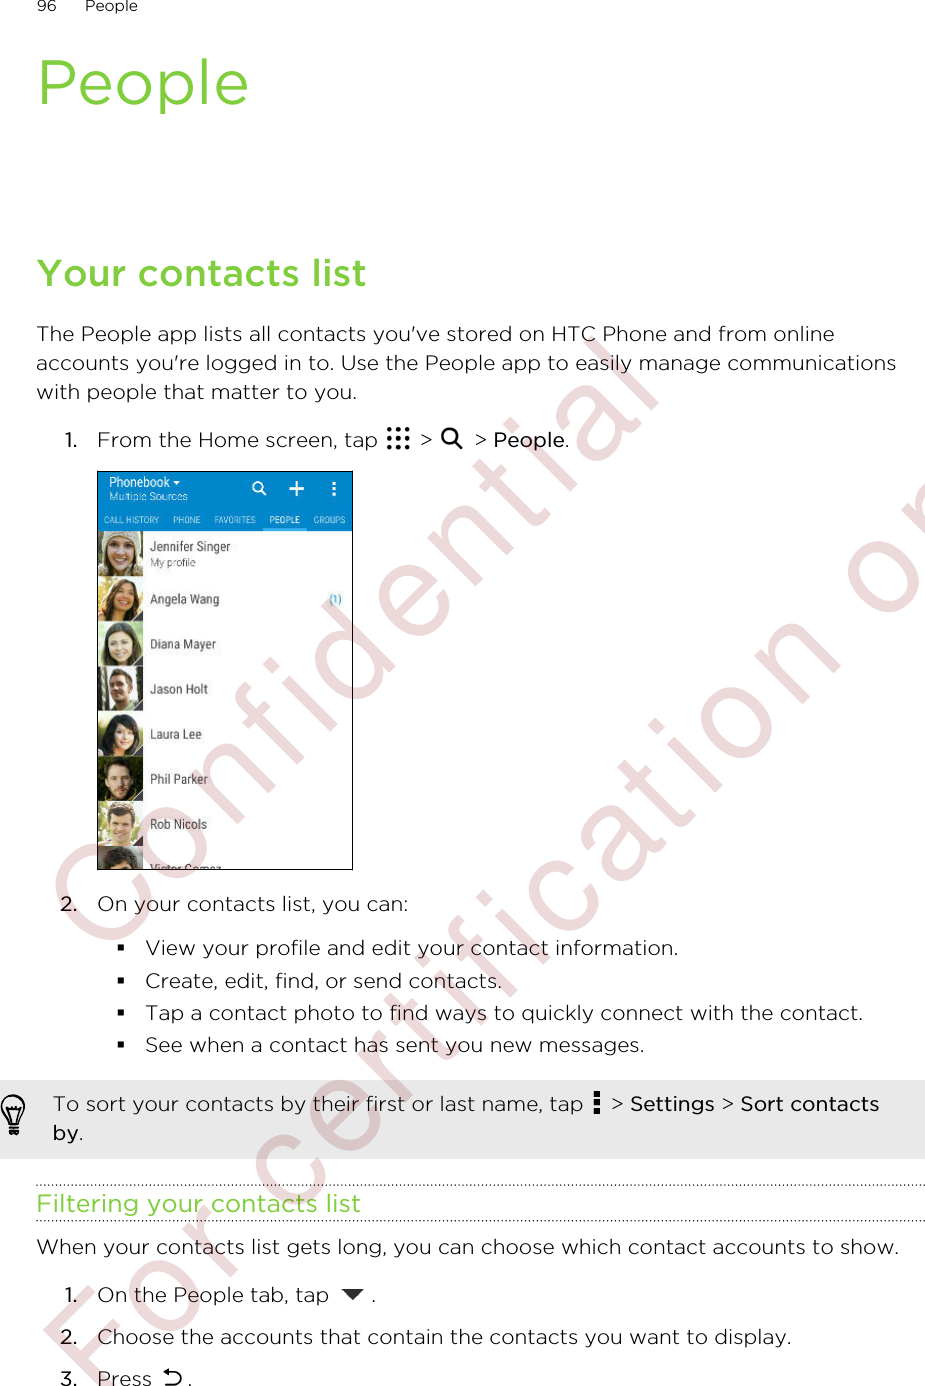 PeopleYour contacts listThe People app lists all contacts you&apos;ve stored on HTC Phone and from onlineaccounts you&apos;re logged in to. Use the People app to easily manage communicationswith people that matter to you.1. From the Home screen, tap   &gt;   &gt; People. 2. On your contacts list, you can:§View your profile and edit your contact information.§Create, edit, find, or send contacts.§Tap a contact photo to find ways to quickly connect with the contact.§See when a contact has sent you new messages.To sort your contacts by their first or last name, tap   &gt; Settings &gt; Sort contactsby.Filtering your contacts listWhen your contacts list gets long, you can choose which contact accounts to show.1. On the People tab, tap  .2. Choose the accounts that contain the contacts you want to display.3. Press  .96 People        Confidential  For certification only